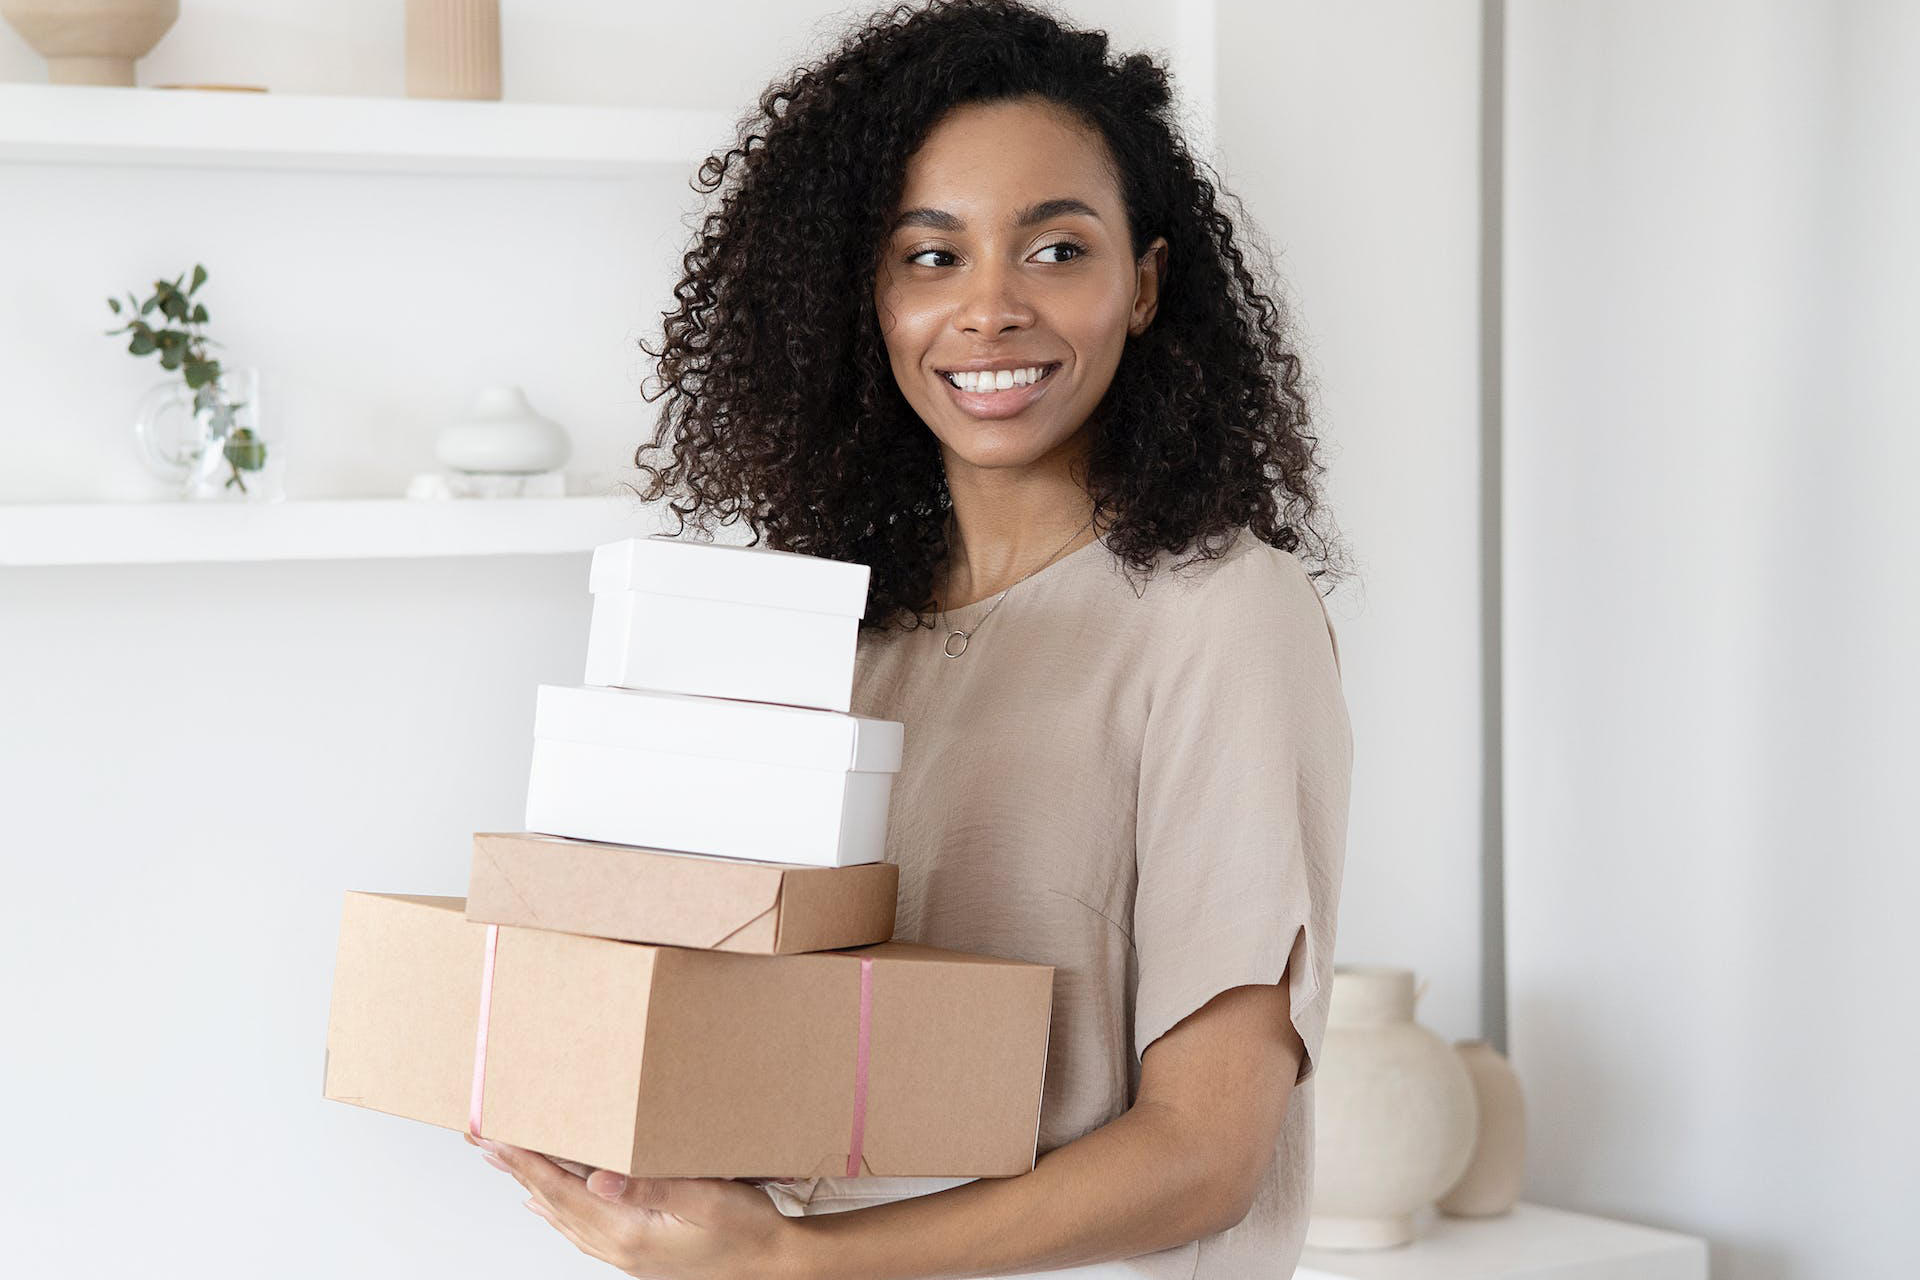 A woman holding a stack of boxes, possibly moving or organizing belongings.